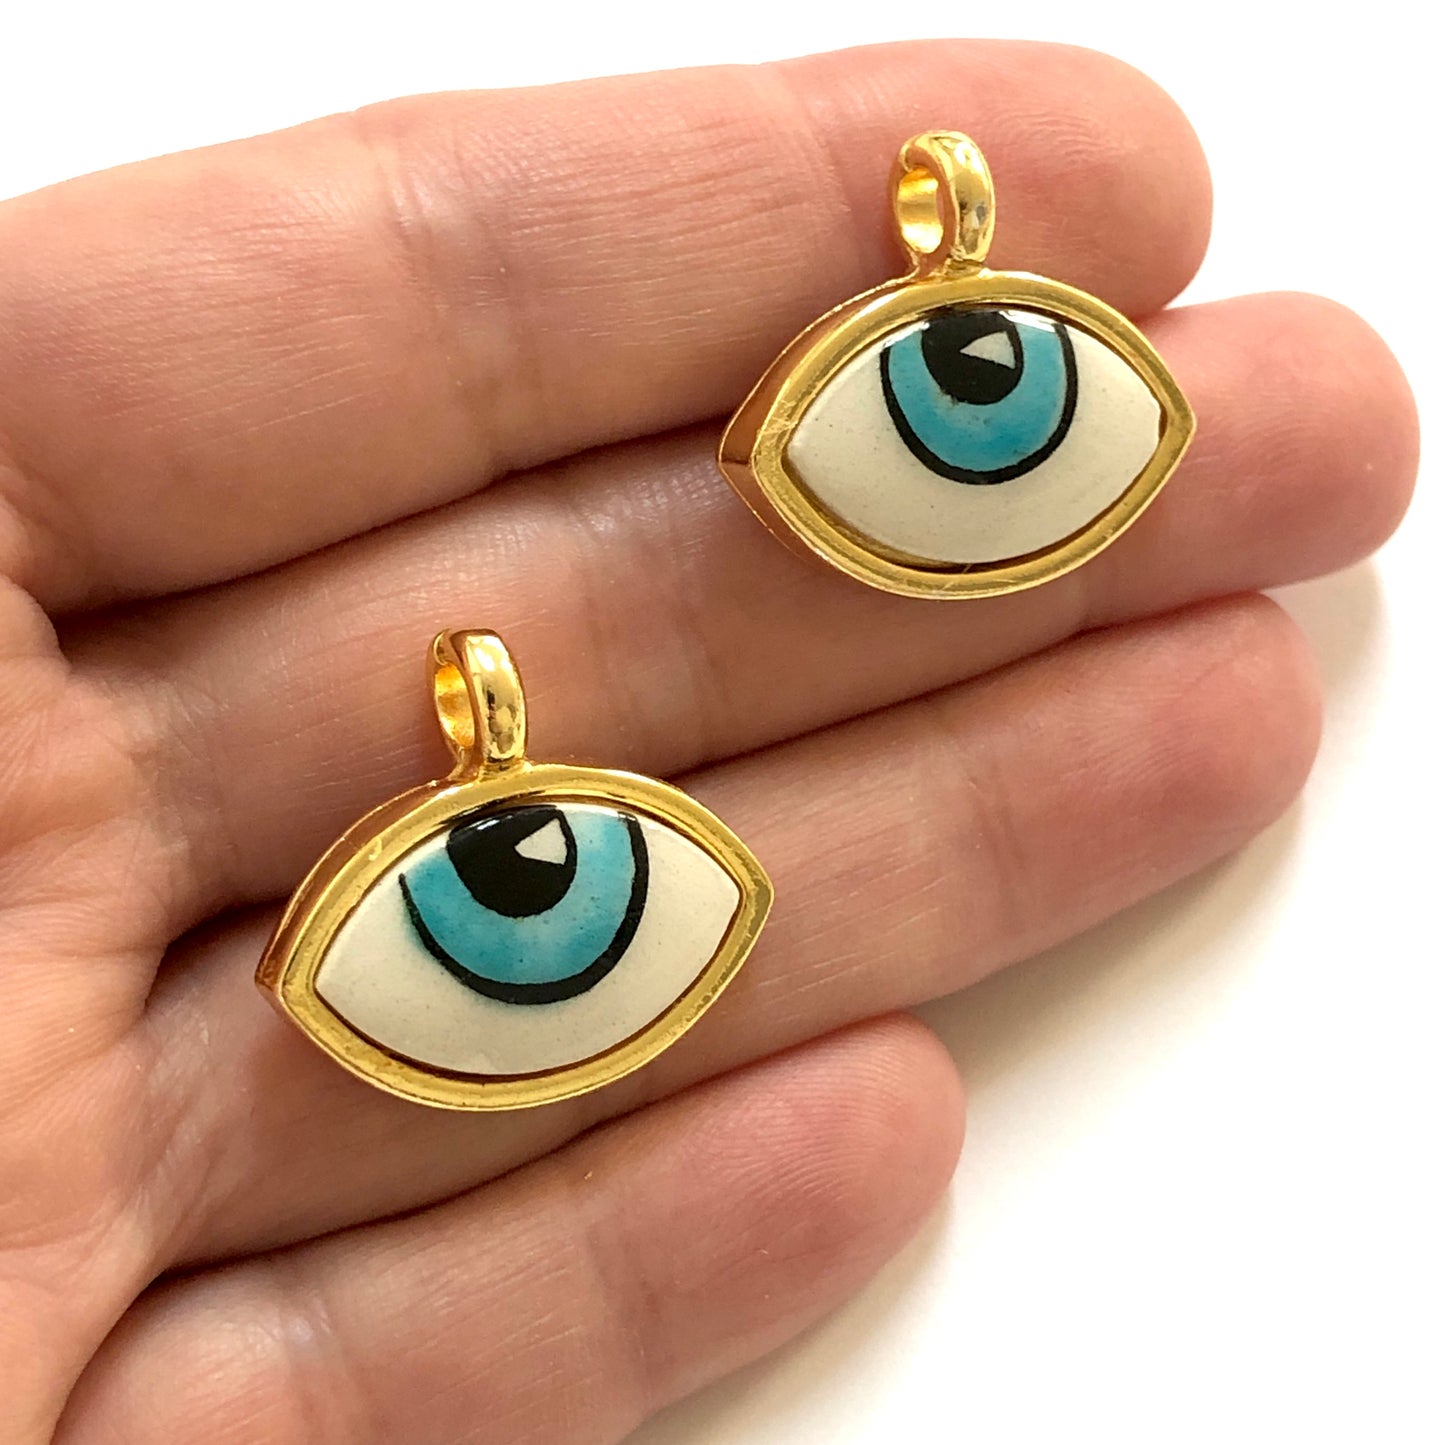 Gold Plated Framed Hand Painted Ceramic 25x24mm Eye Pendant-030